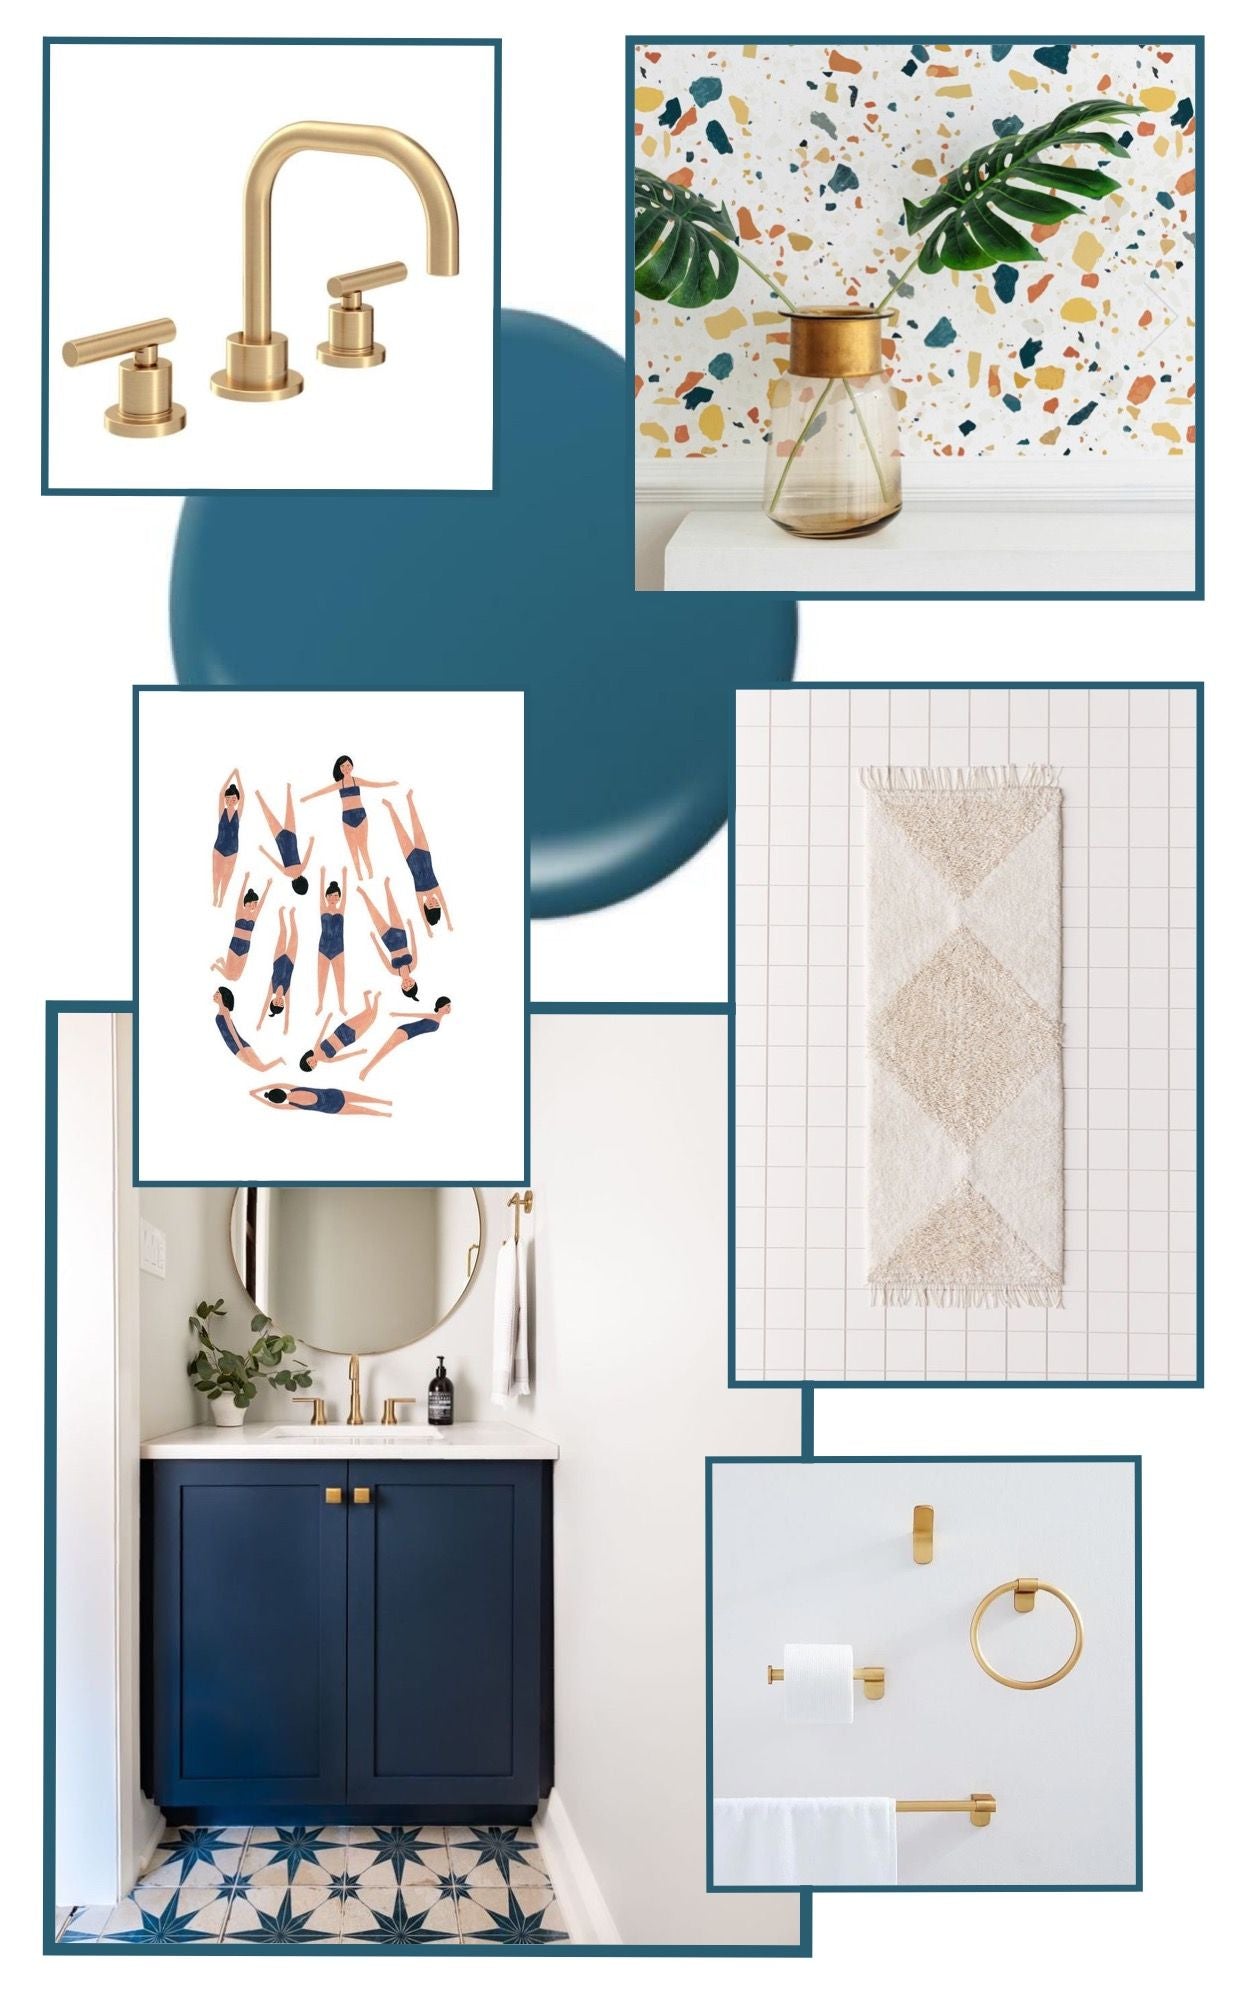 Interior project mood boards for inspiration